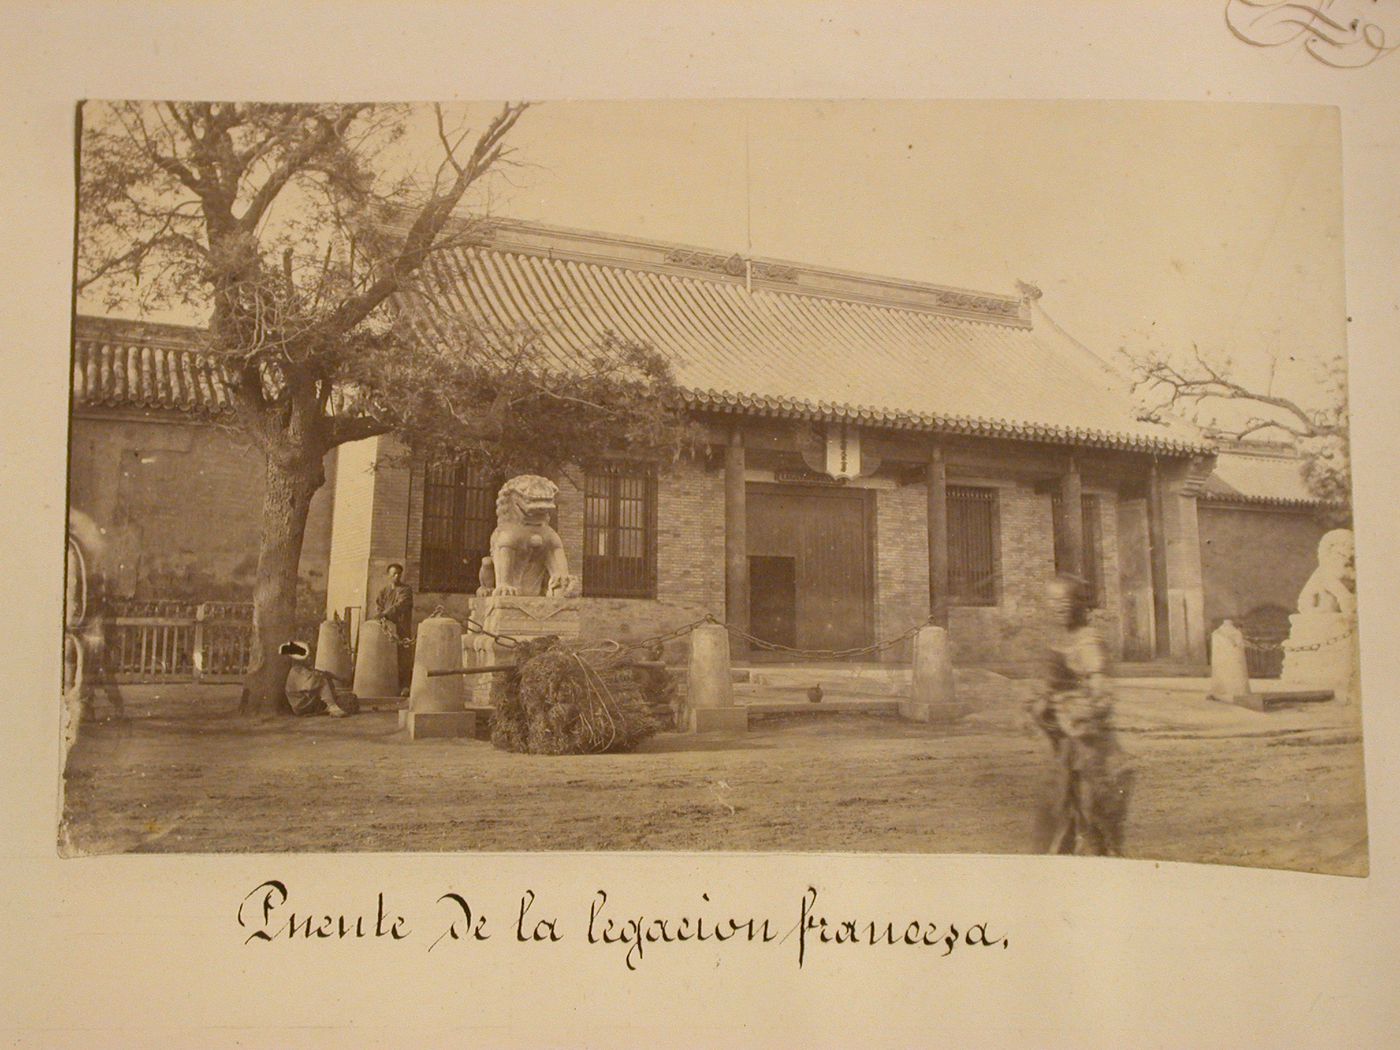 View of the gateway to the French Legation, Peking (now Beijing), China